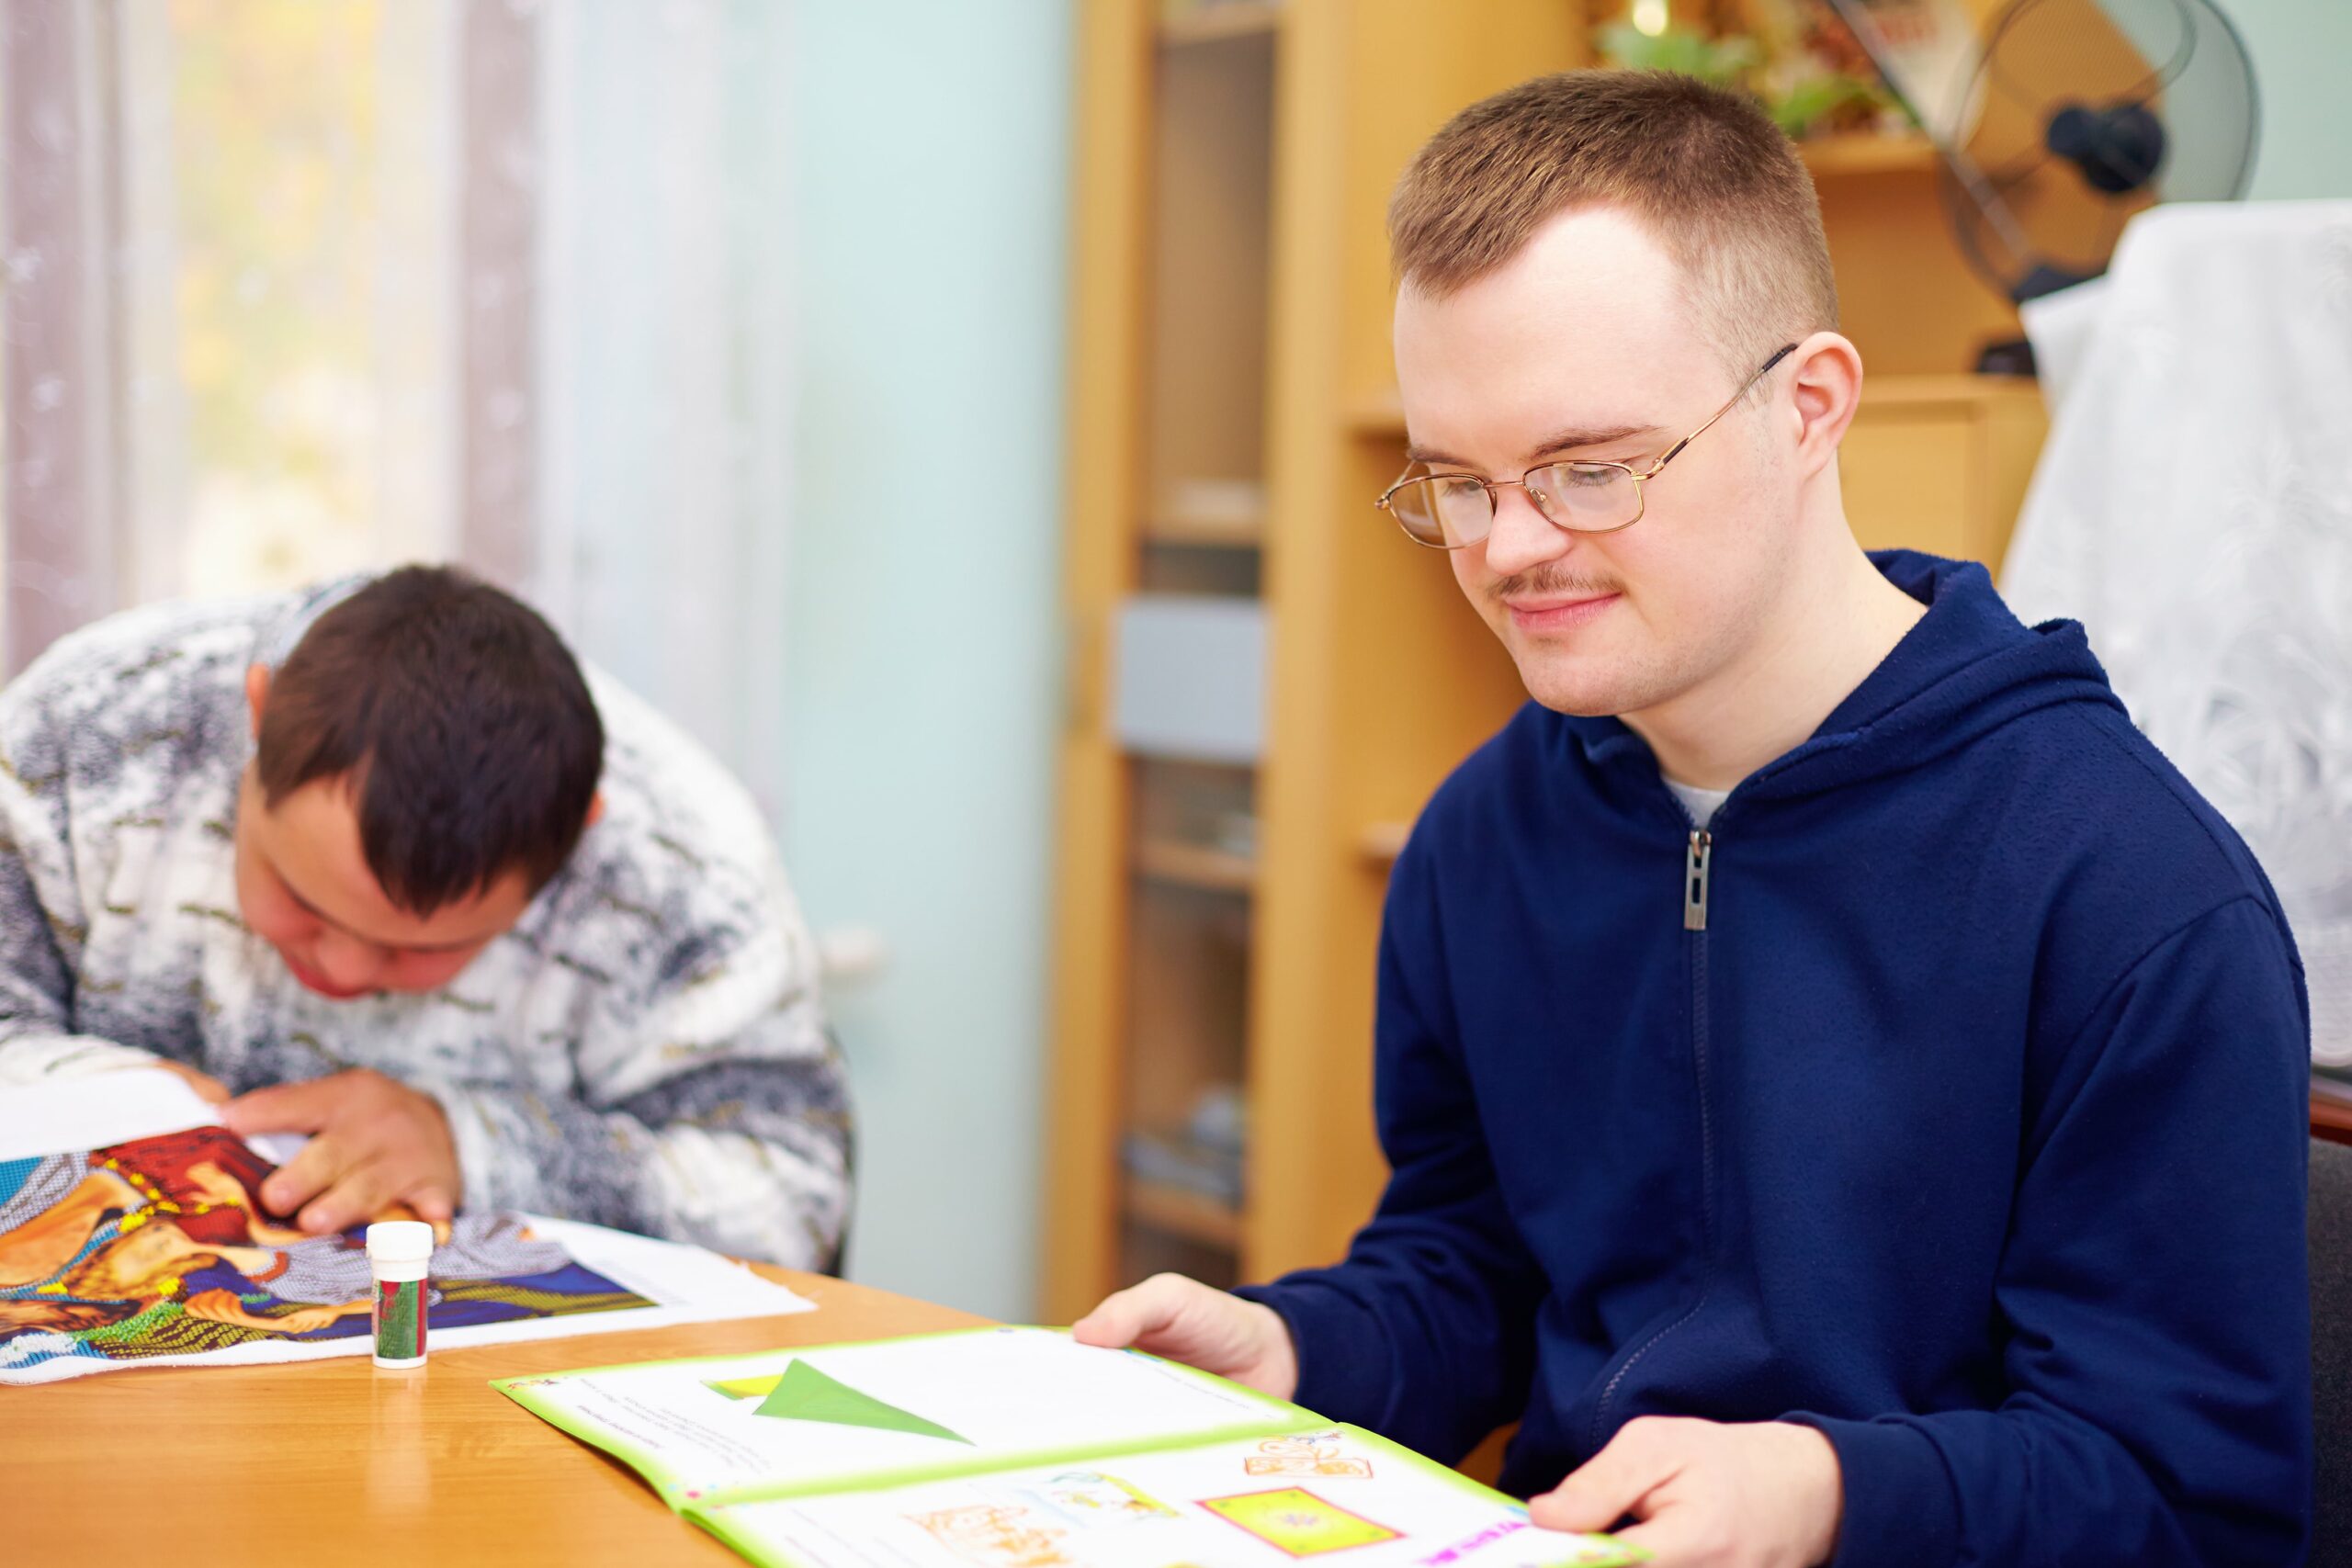 man with learning disability reading a book